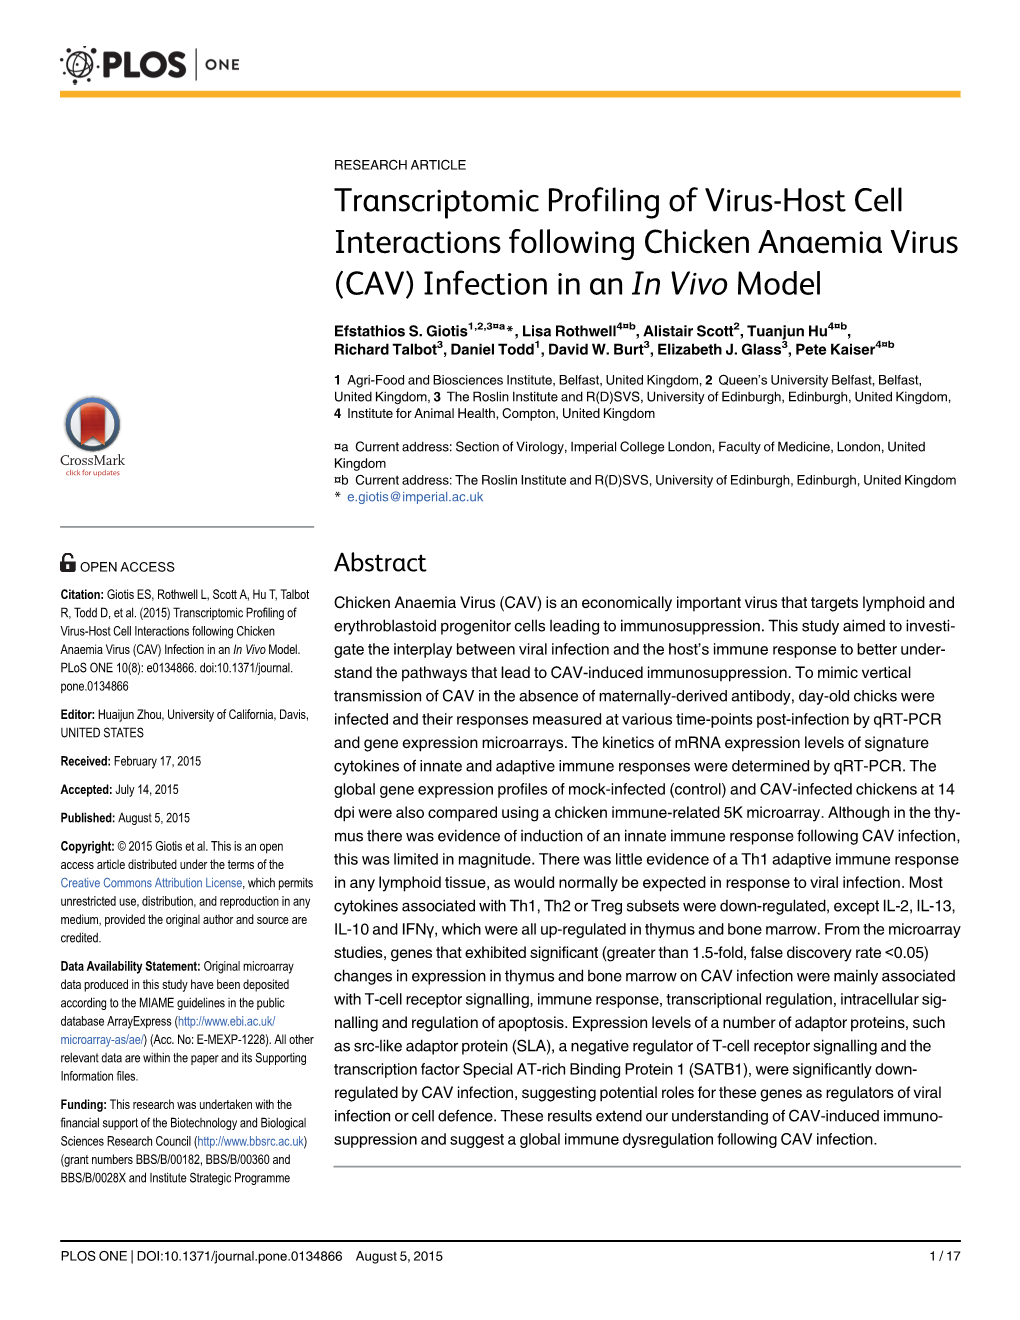 Transcriptomic Profiling of Virus-Host Cell Interactions Following Chicken Anaemia Virus (CAV) Infection in an in Vivo Model